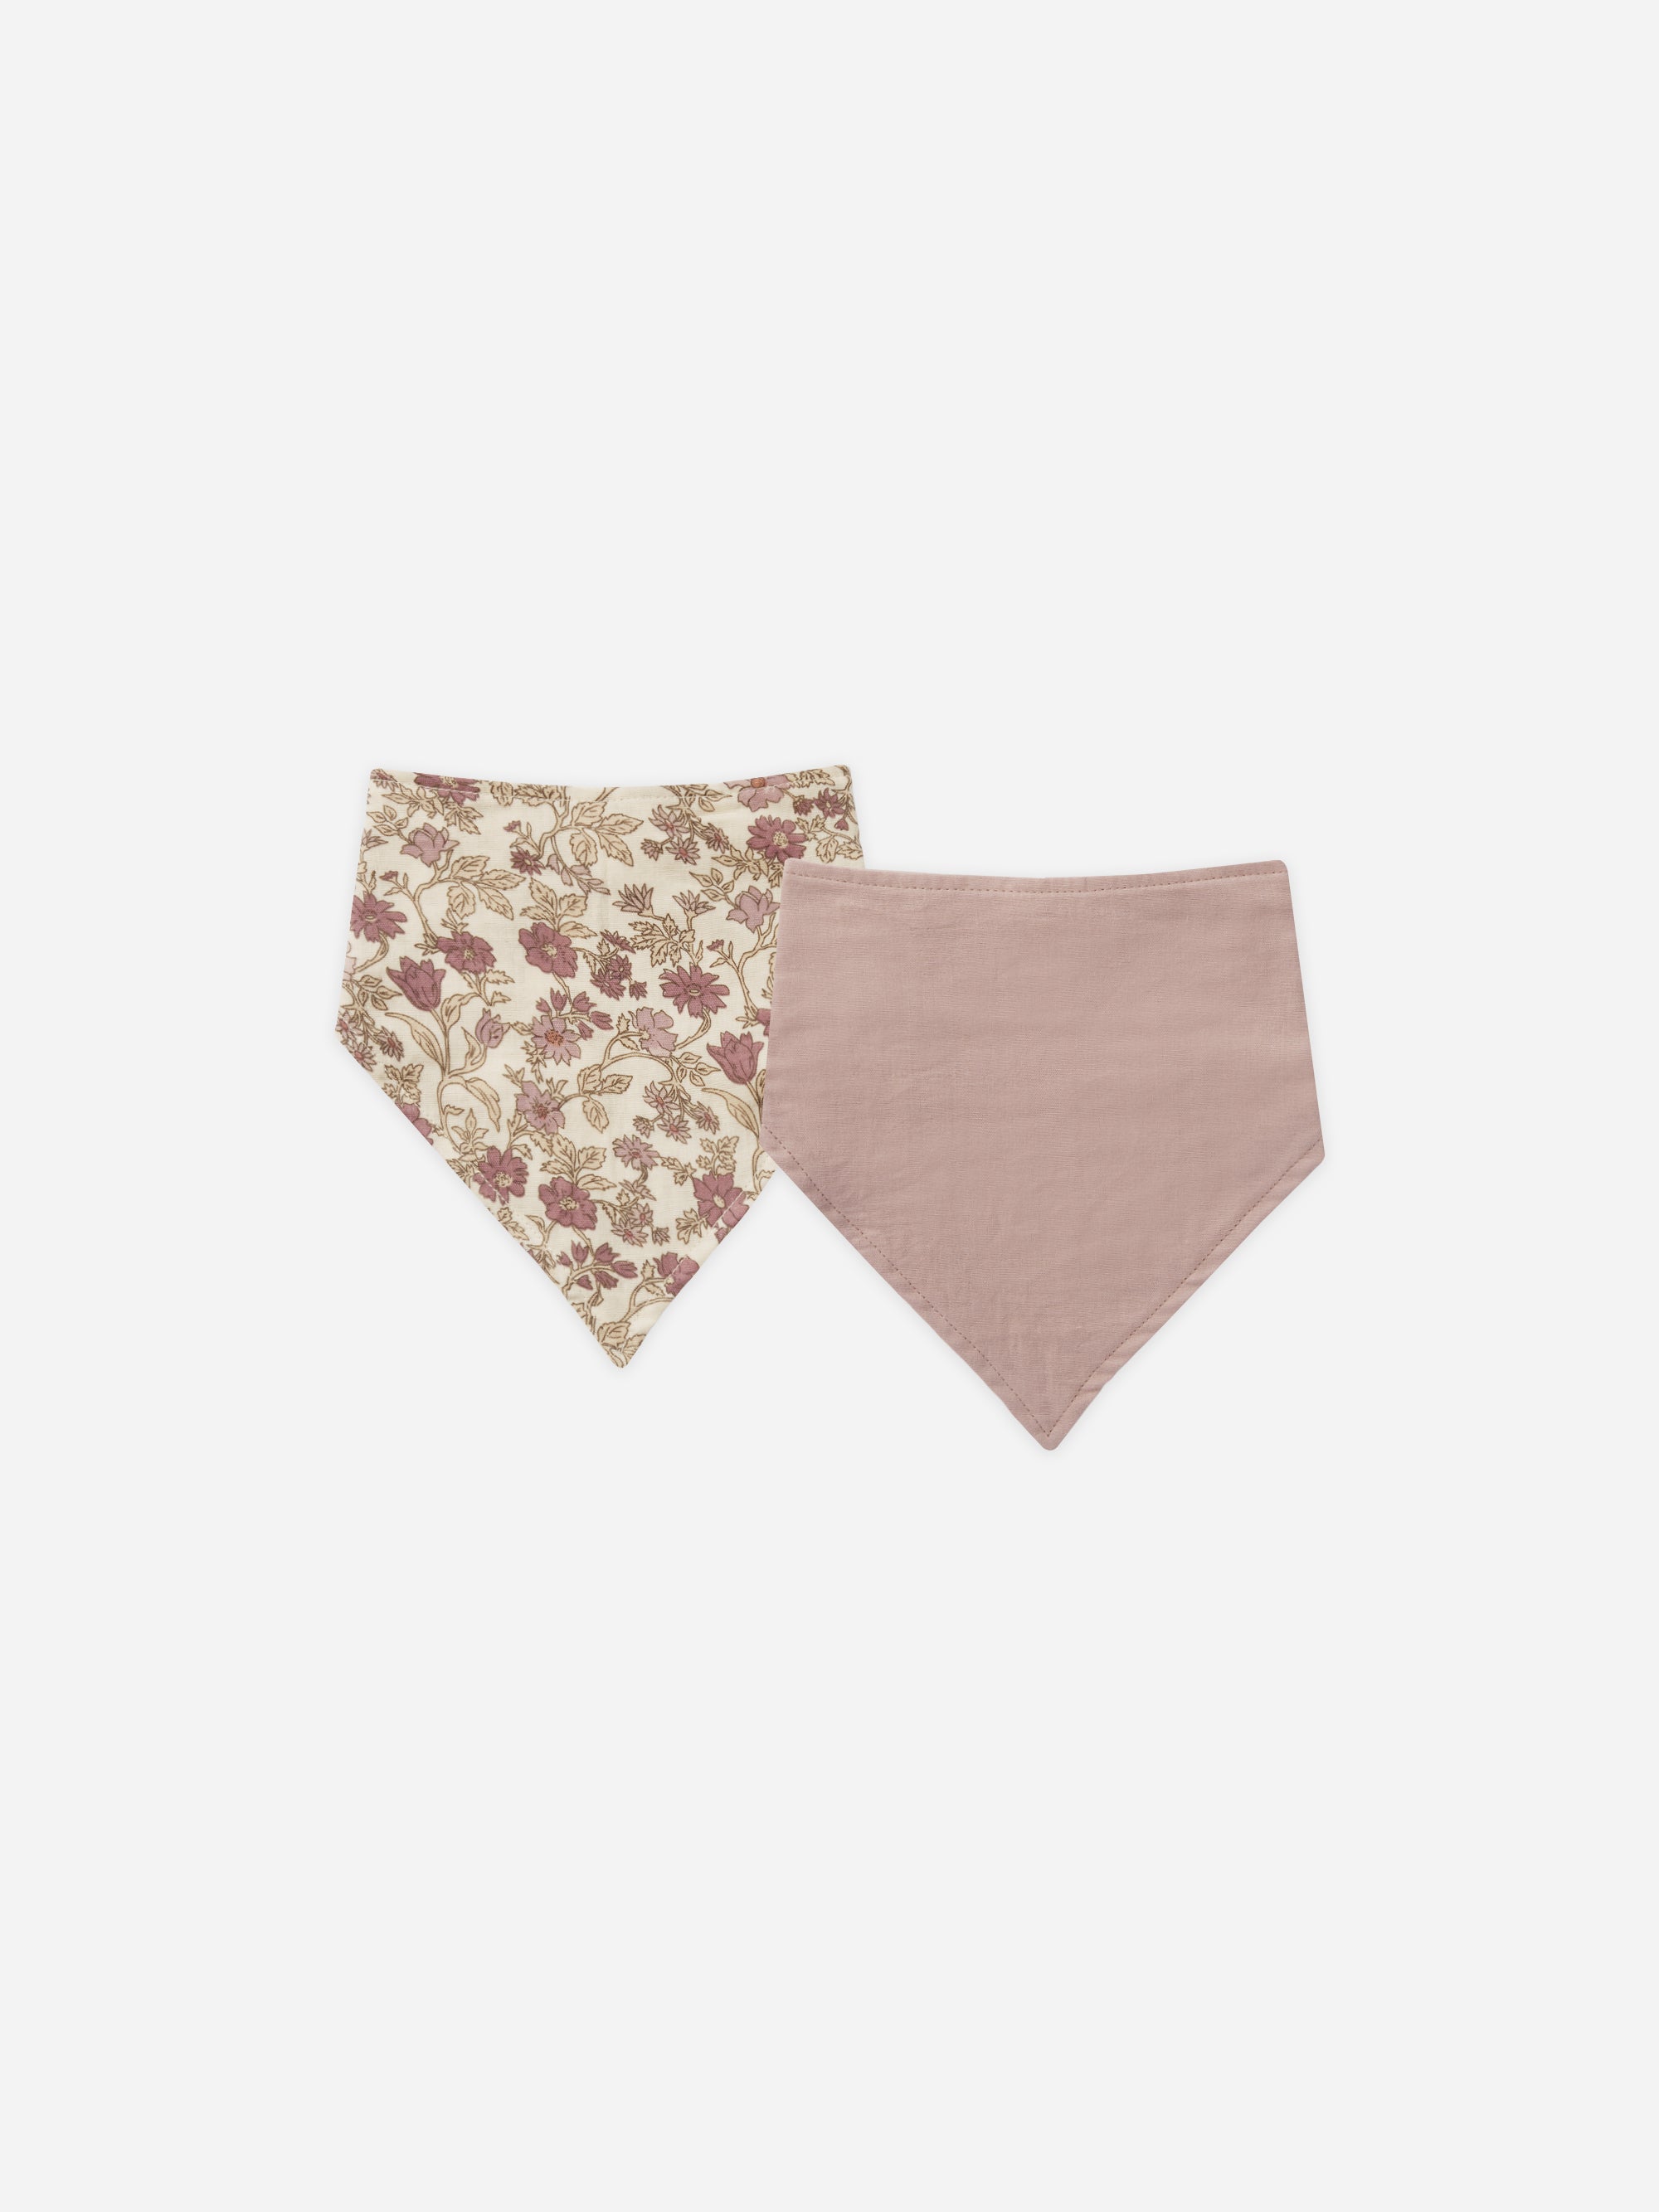 Scarf Bib || Bloom, Mauve - Rylee + Cru | Kids Clothes | Trendy Baby Clothes | Modern Infant Outfits |